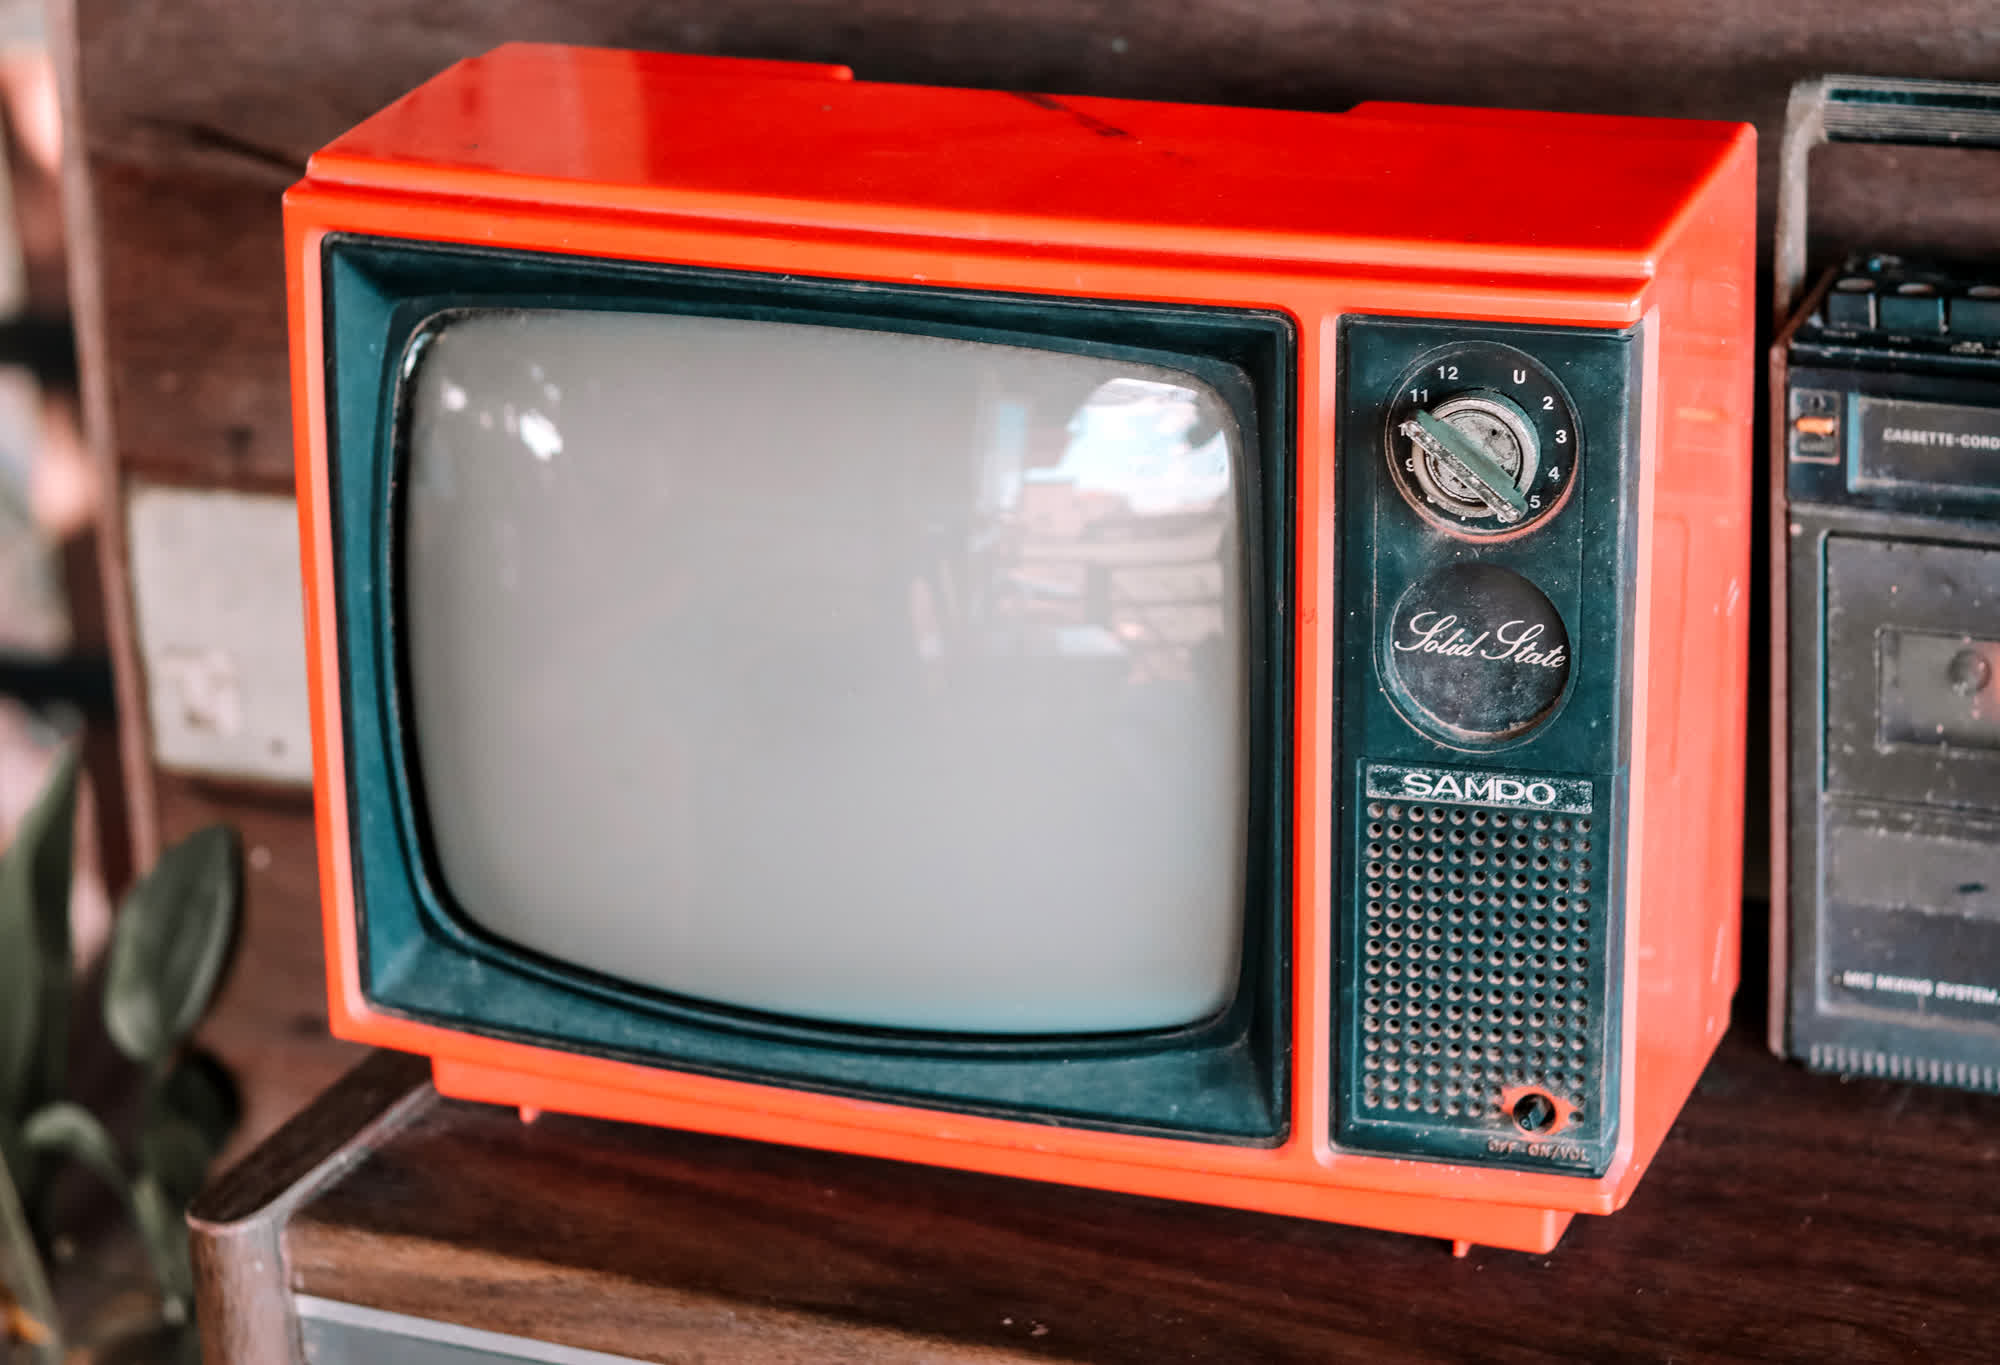 Linear TV viewing falls below 50% among US audiences for the first time